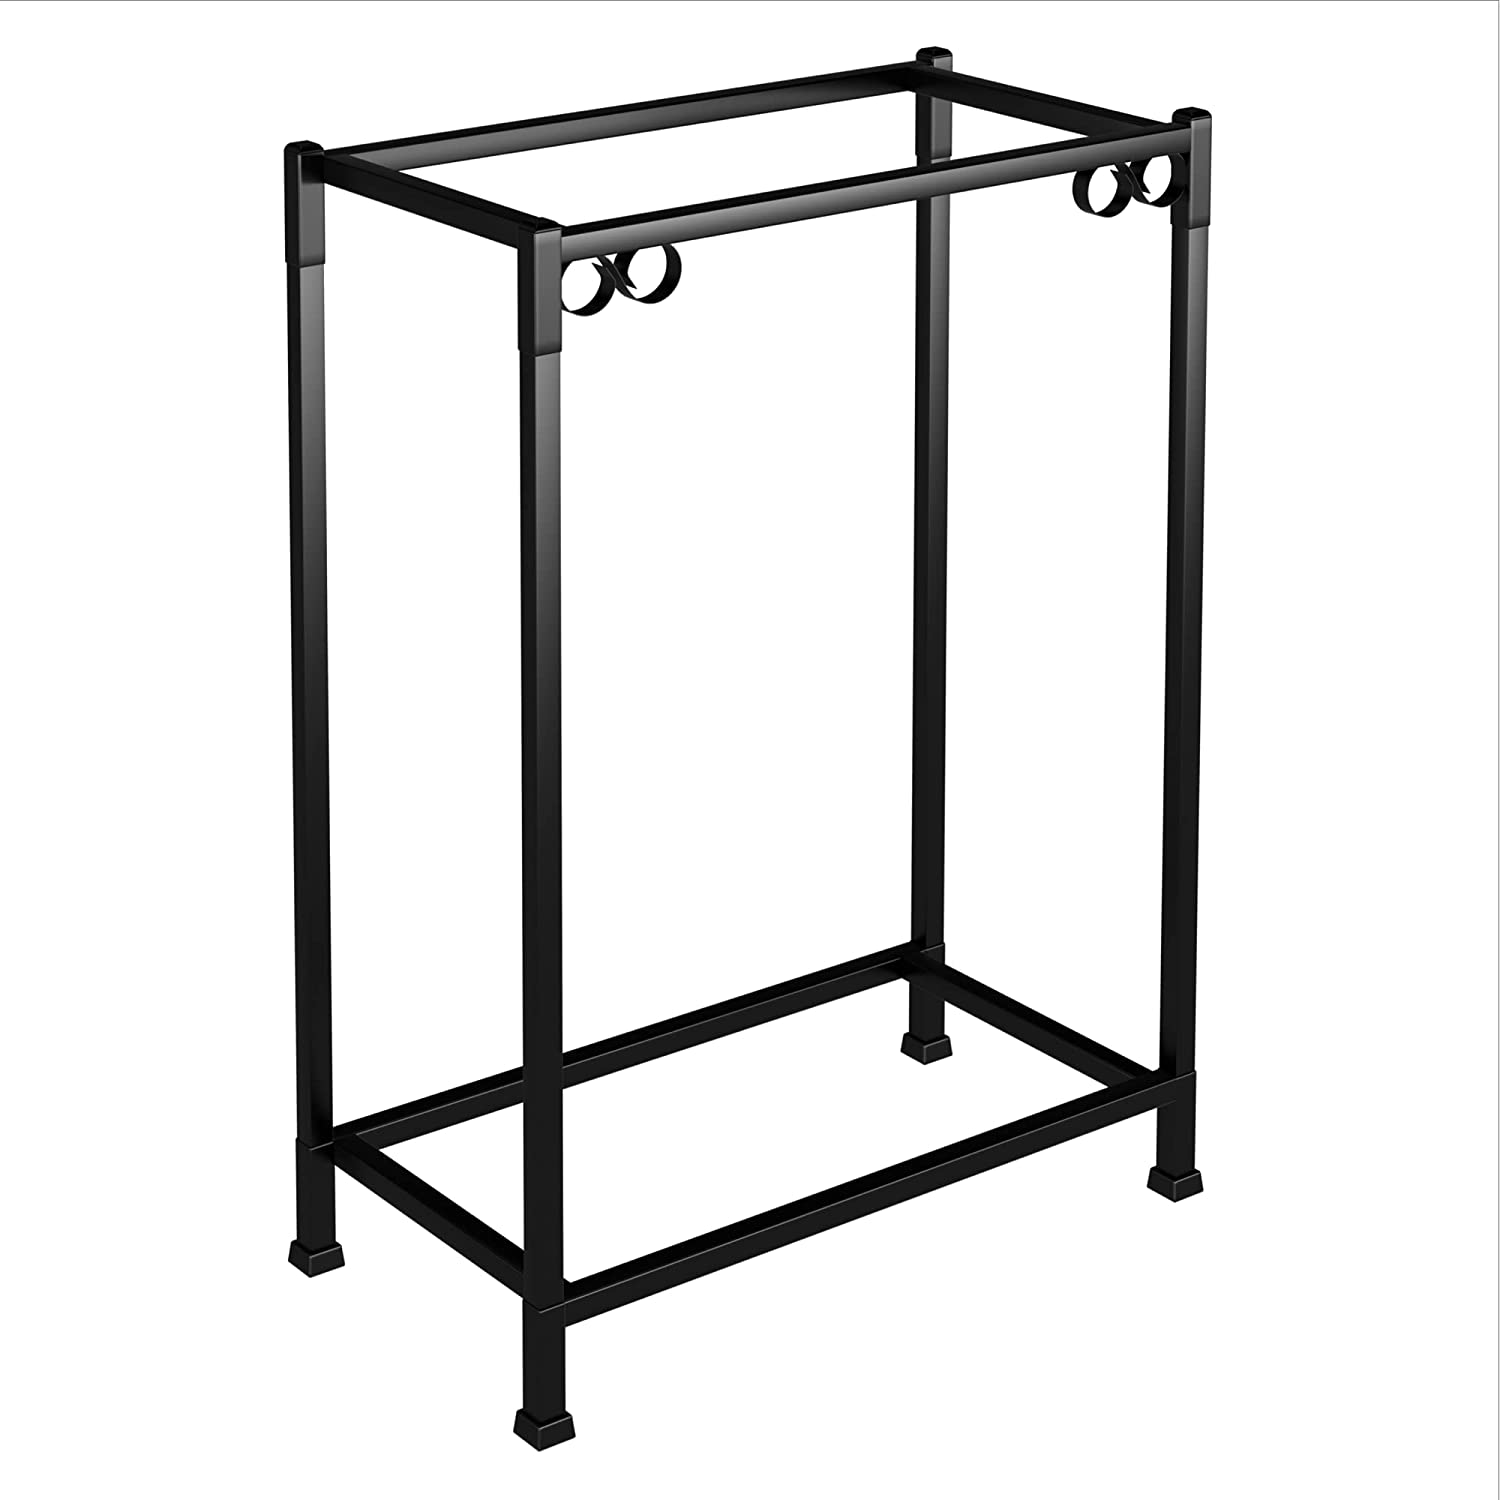 TitanEze 10 Gallon Double Aquarium Stand (2 Stands in 1), Fish Tank Stand, Bird Cage Stand, 22.5" W x 31" H x 10.5" D